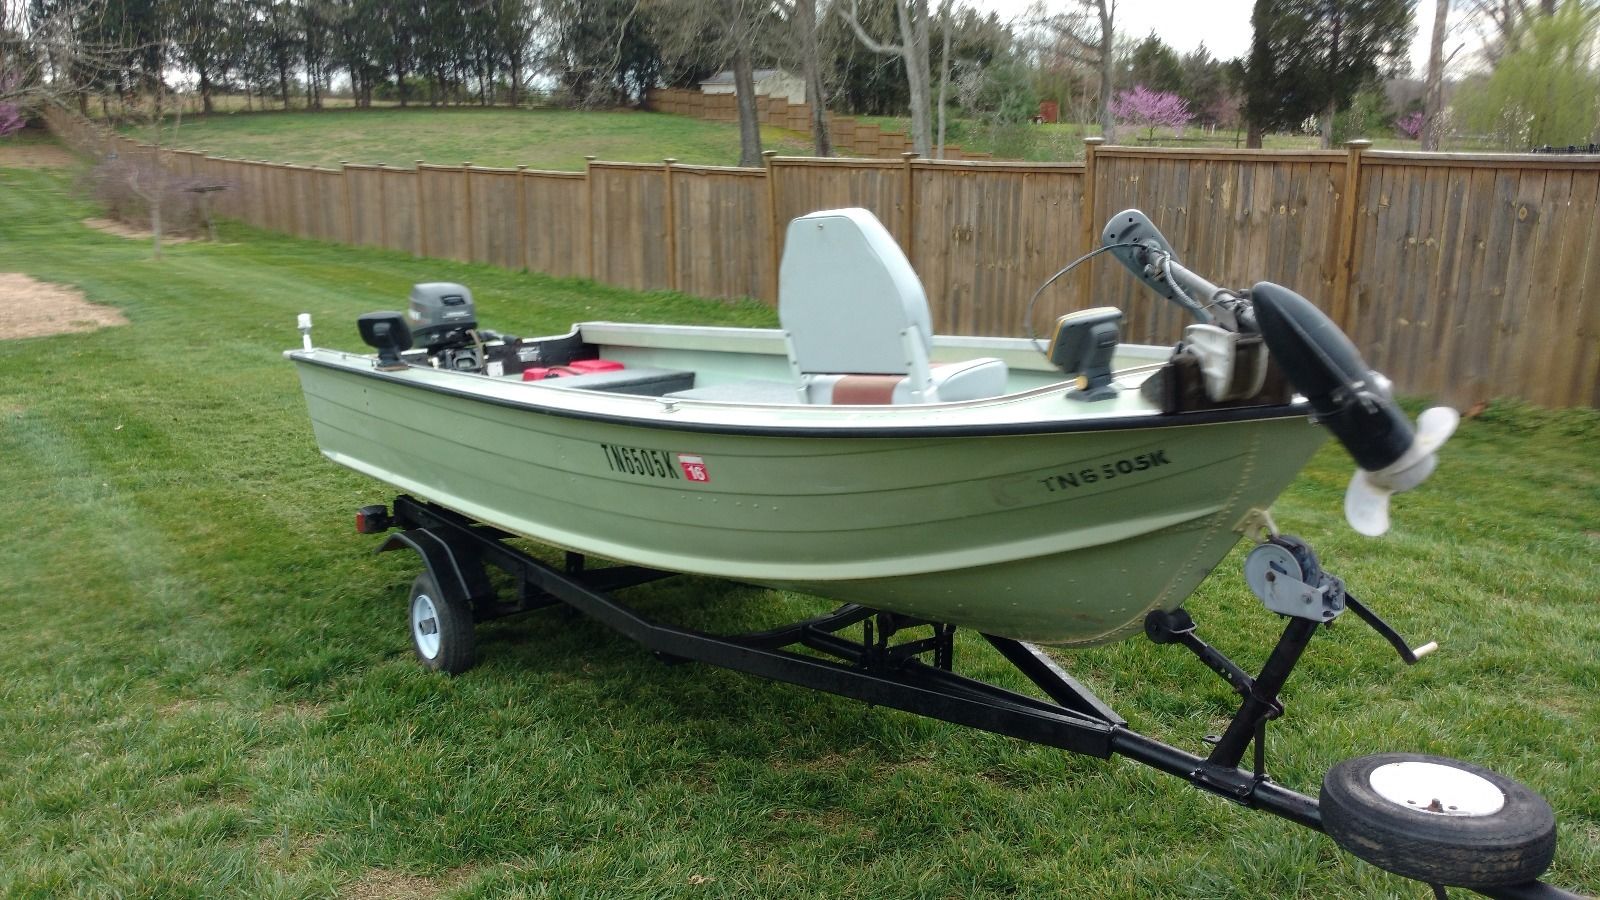 Starcraft 1985 for sale for $2,200 - Boats-from-USA.com